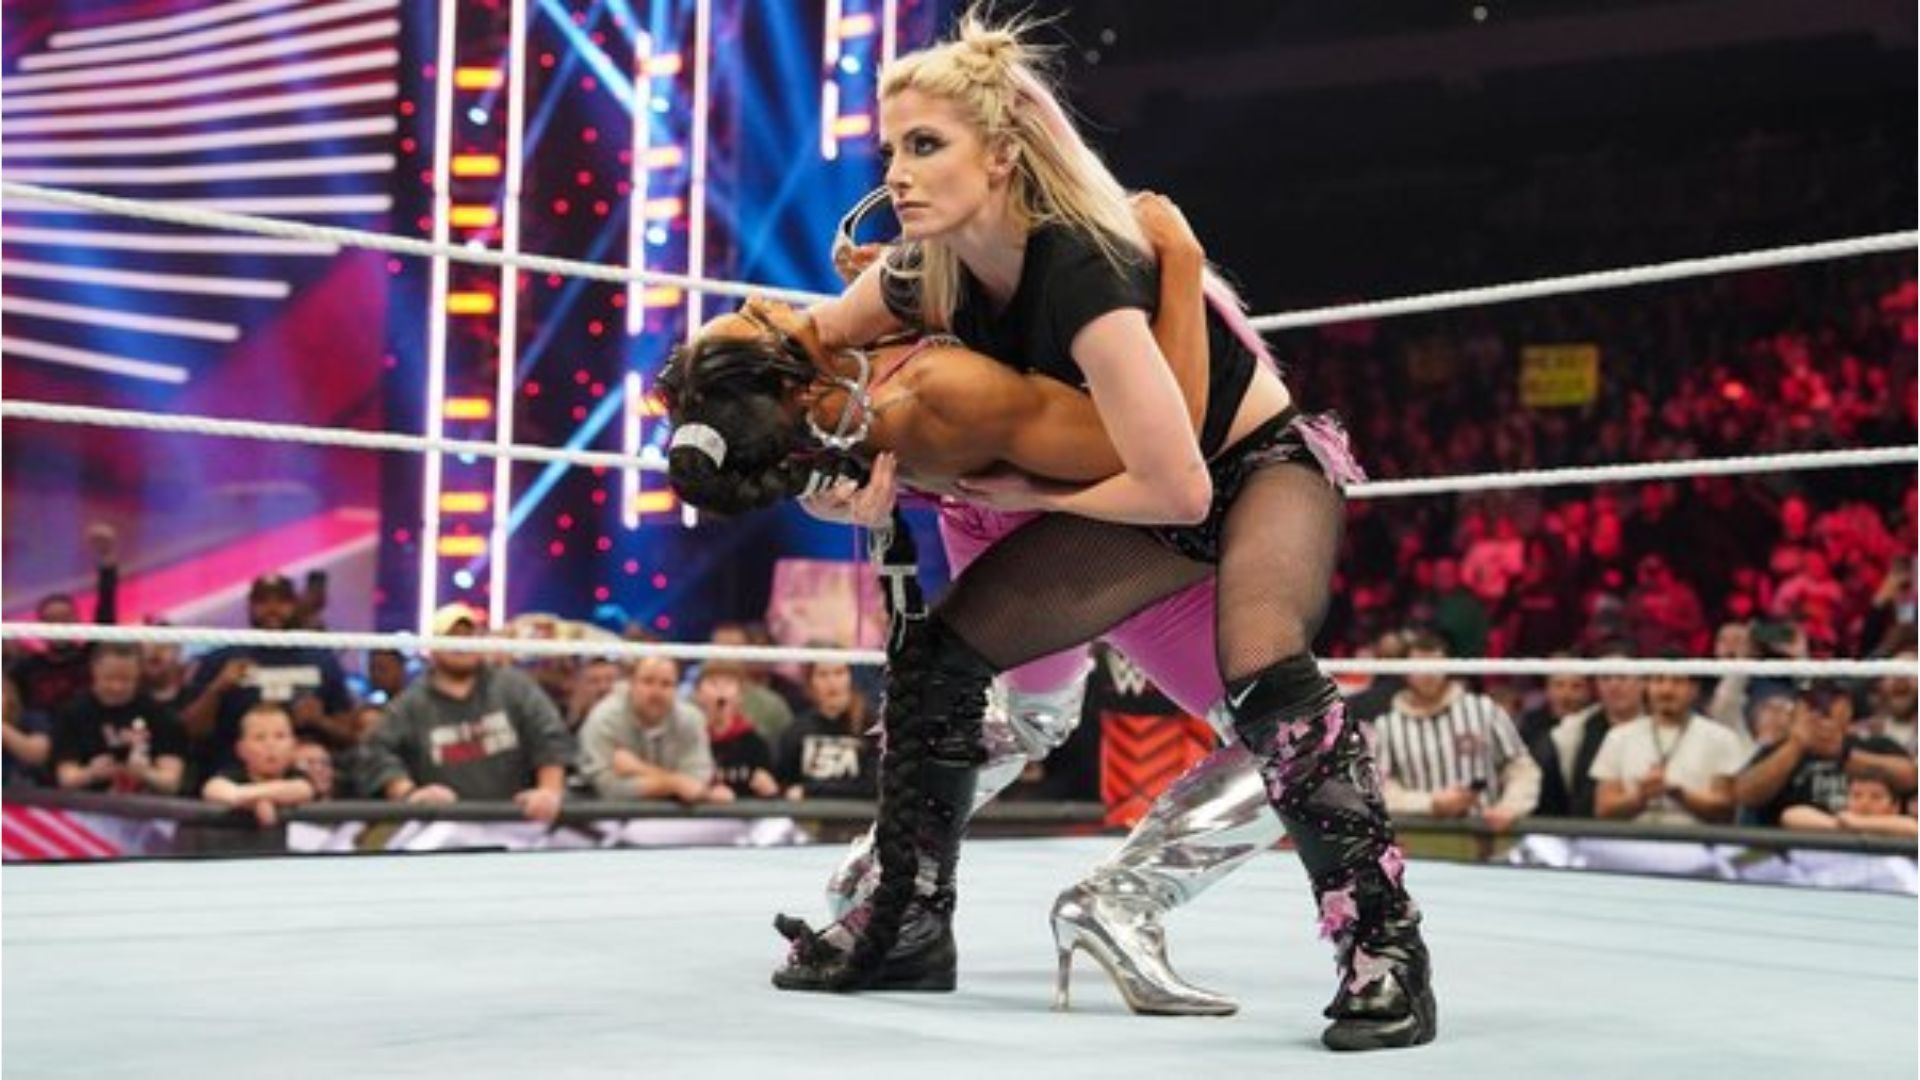 Alexa Bliss is the new #1 contender to Bianca Belair